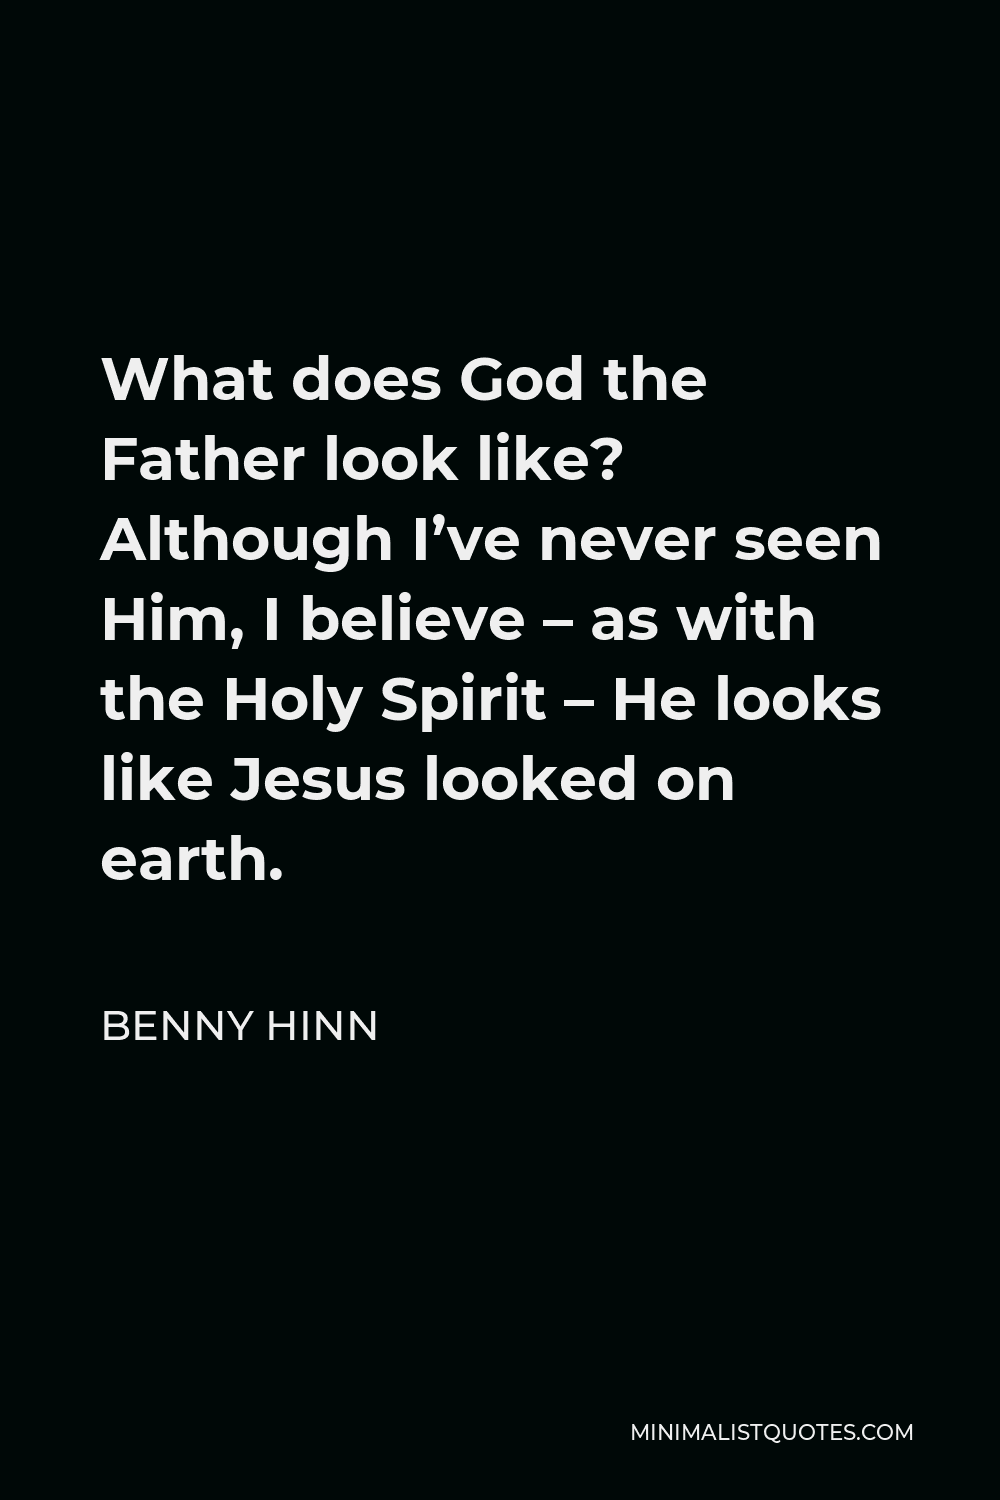 Benny Hinn Quote - What does God the Father look like? Although I’ve never seen Him, I believe – as with the Holy Spirit – He looks like Jesus looked on earth.